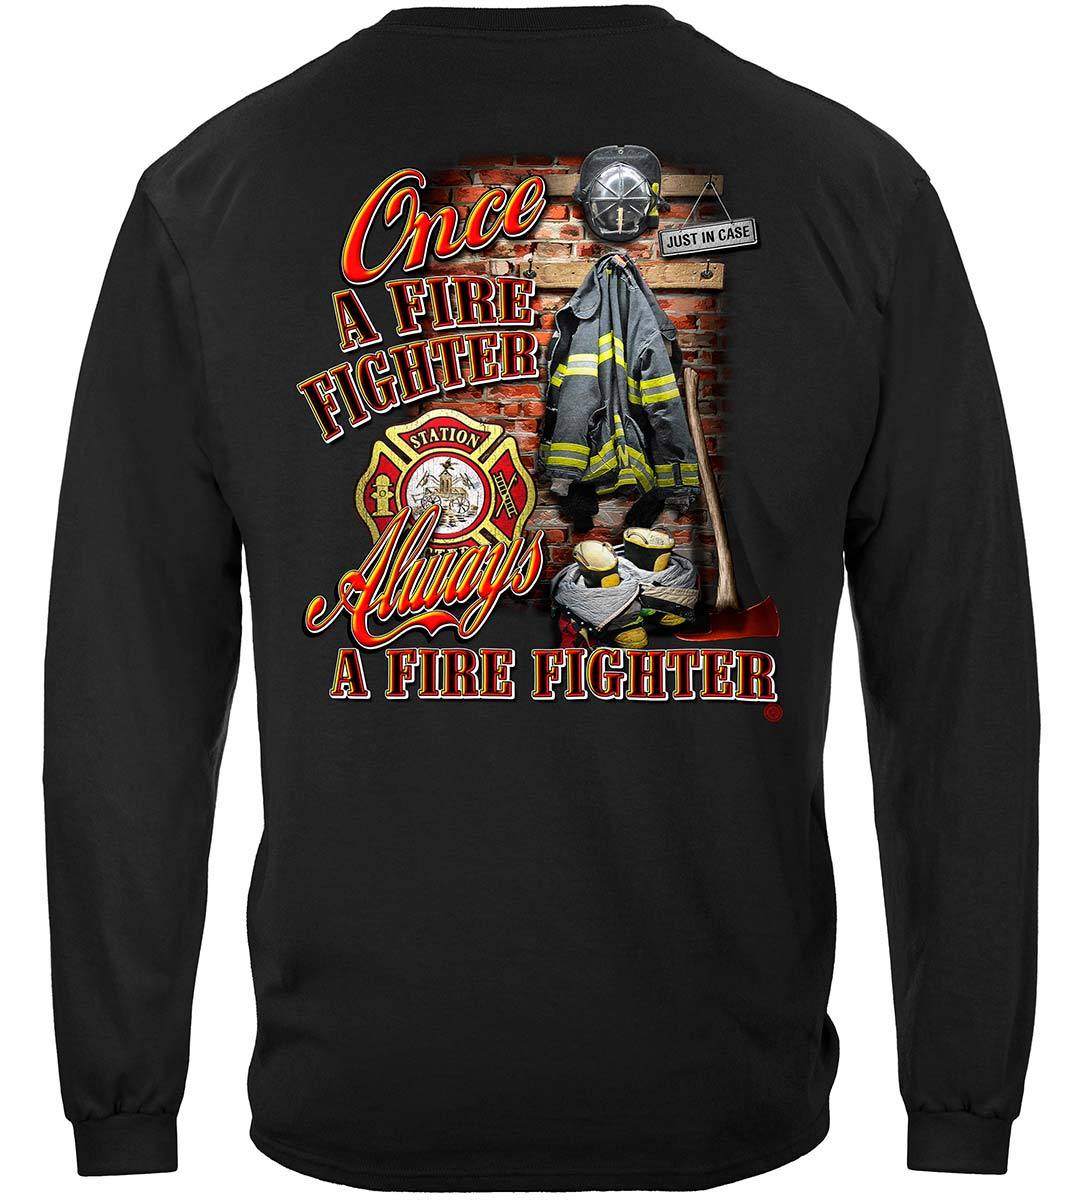 Once And Always a Firefighter Premium Hooded Sweat Shirt